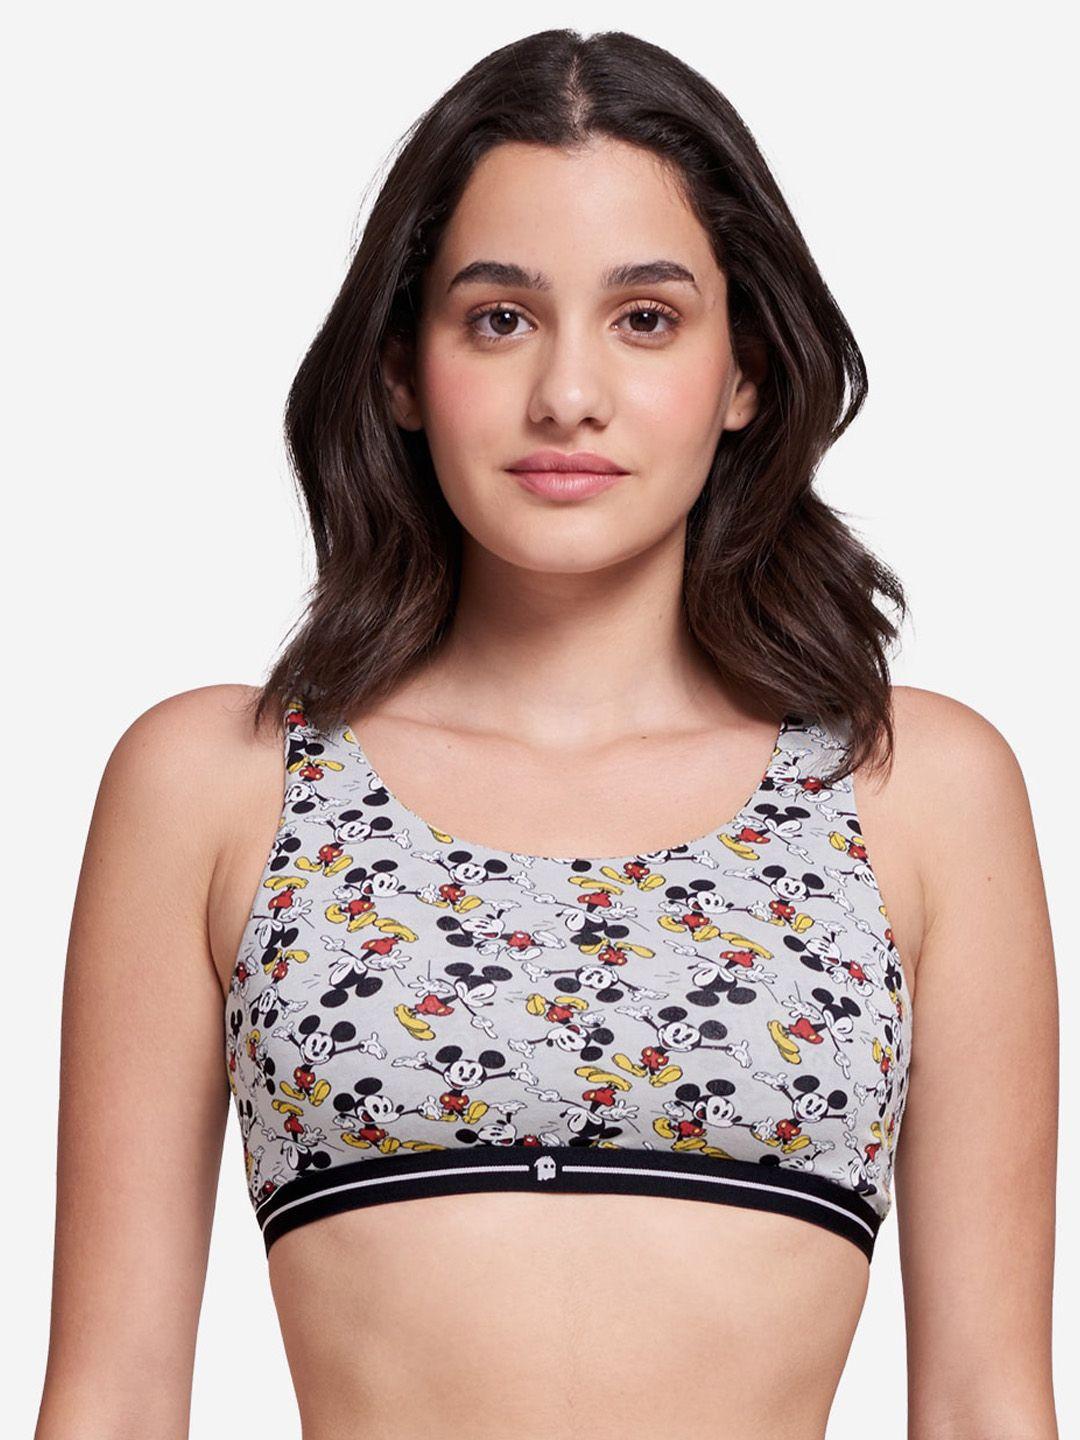 the souled store grey & black mickey mouse printed sports bra